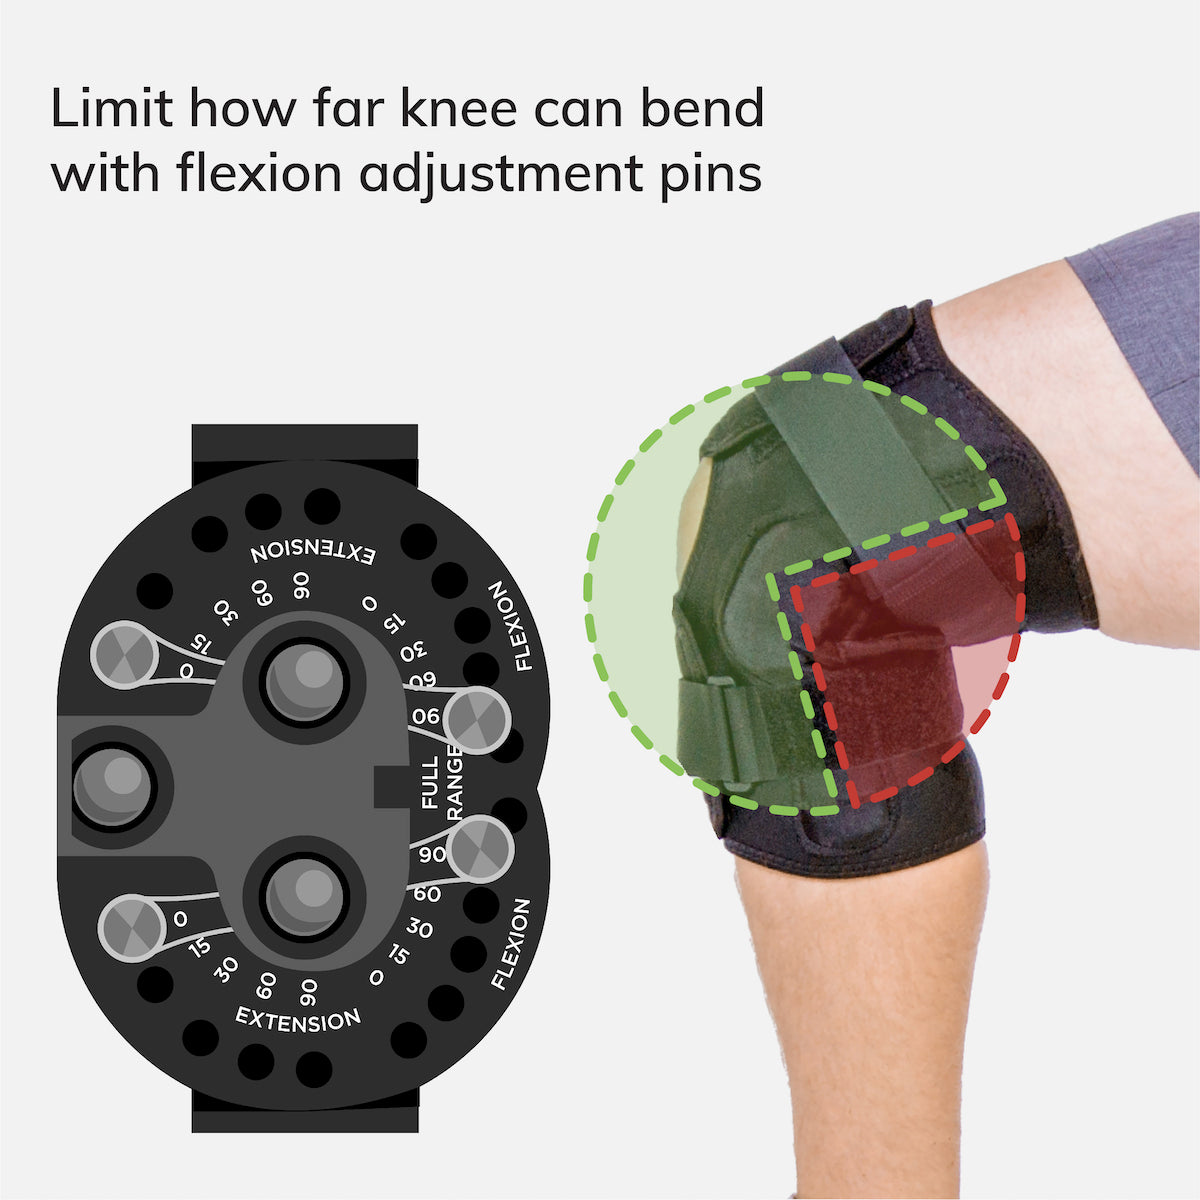 hinges on the torn meniscus knee brace can be set to prevent flexion or extension